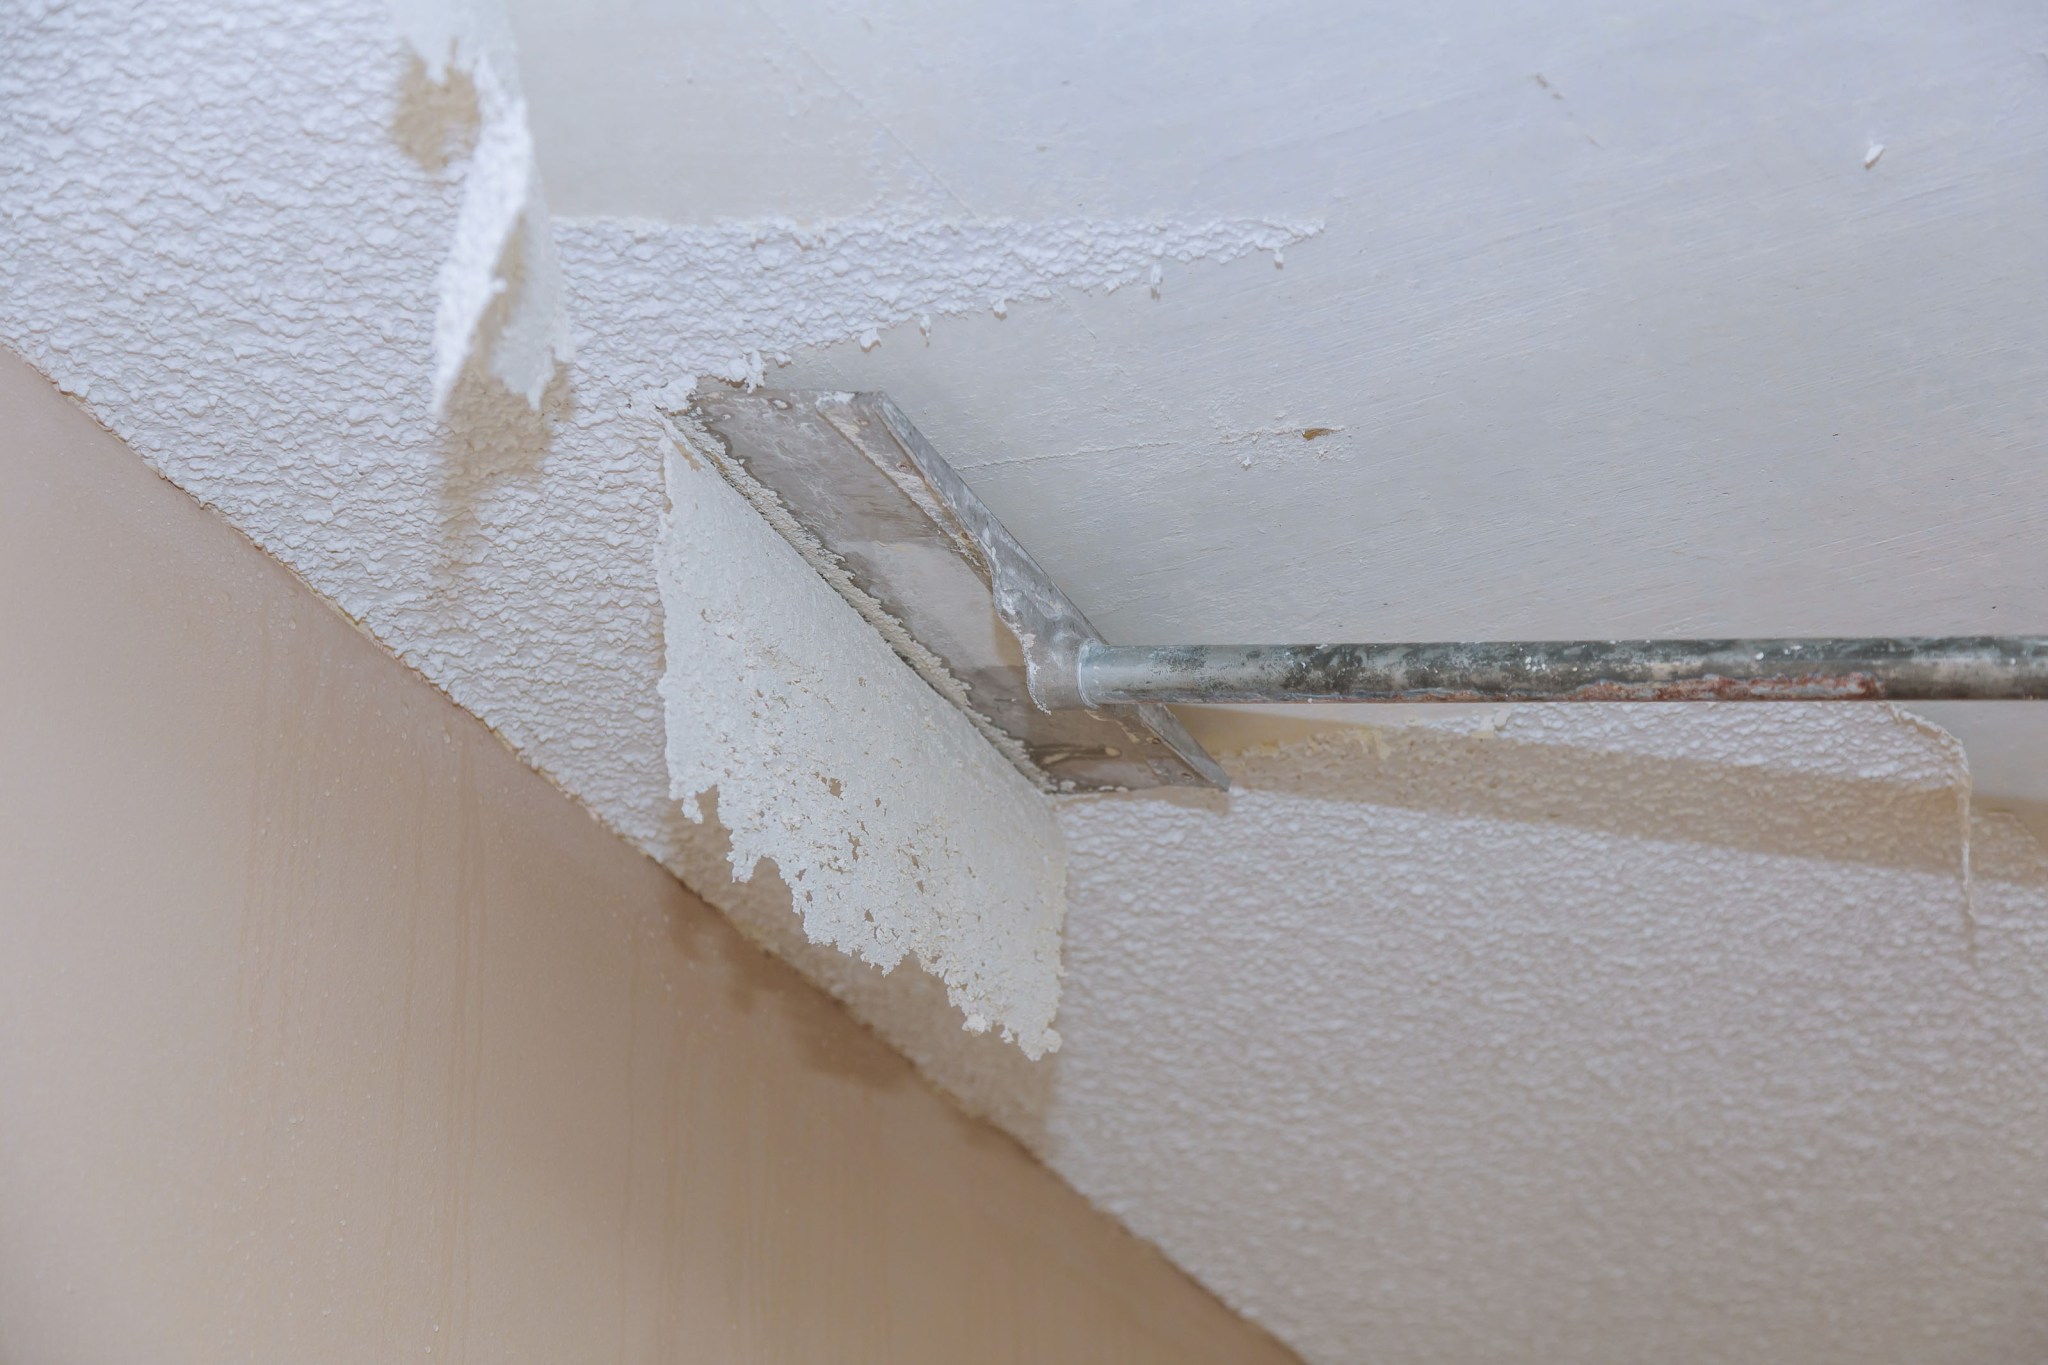 DIY-ing A Popcorn Ceiling Removal? Here's What You Should Know